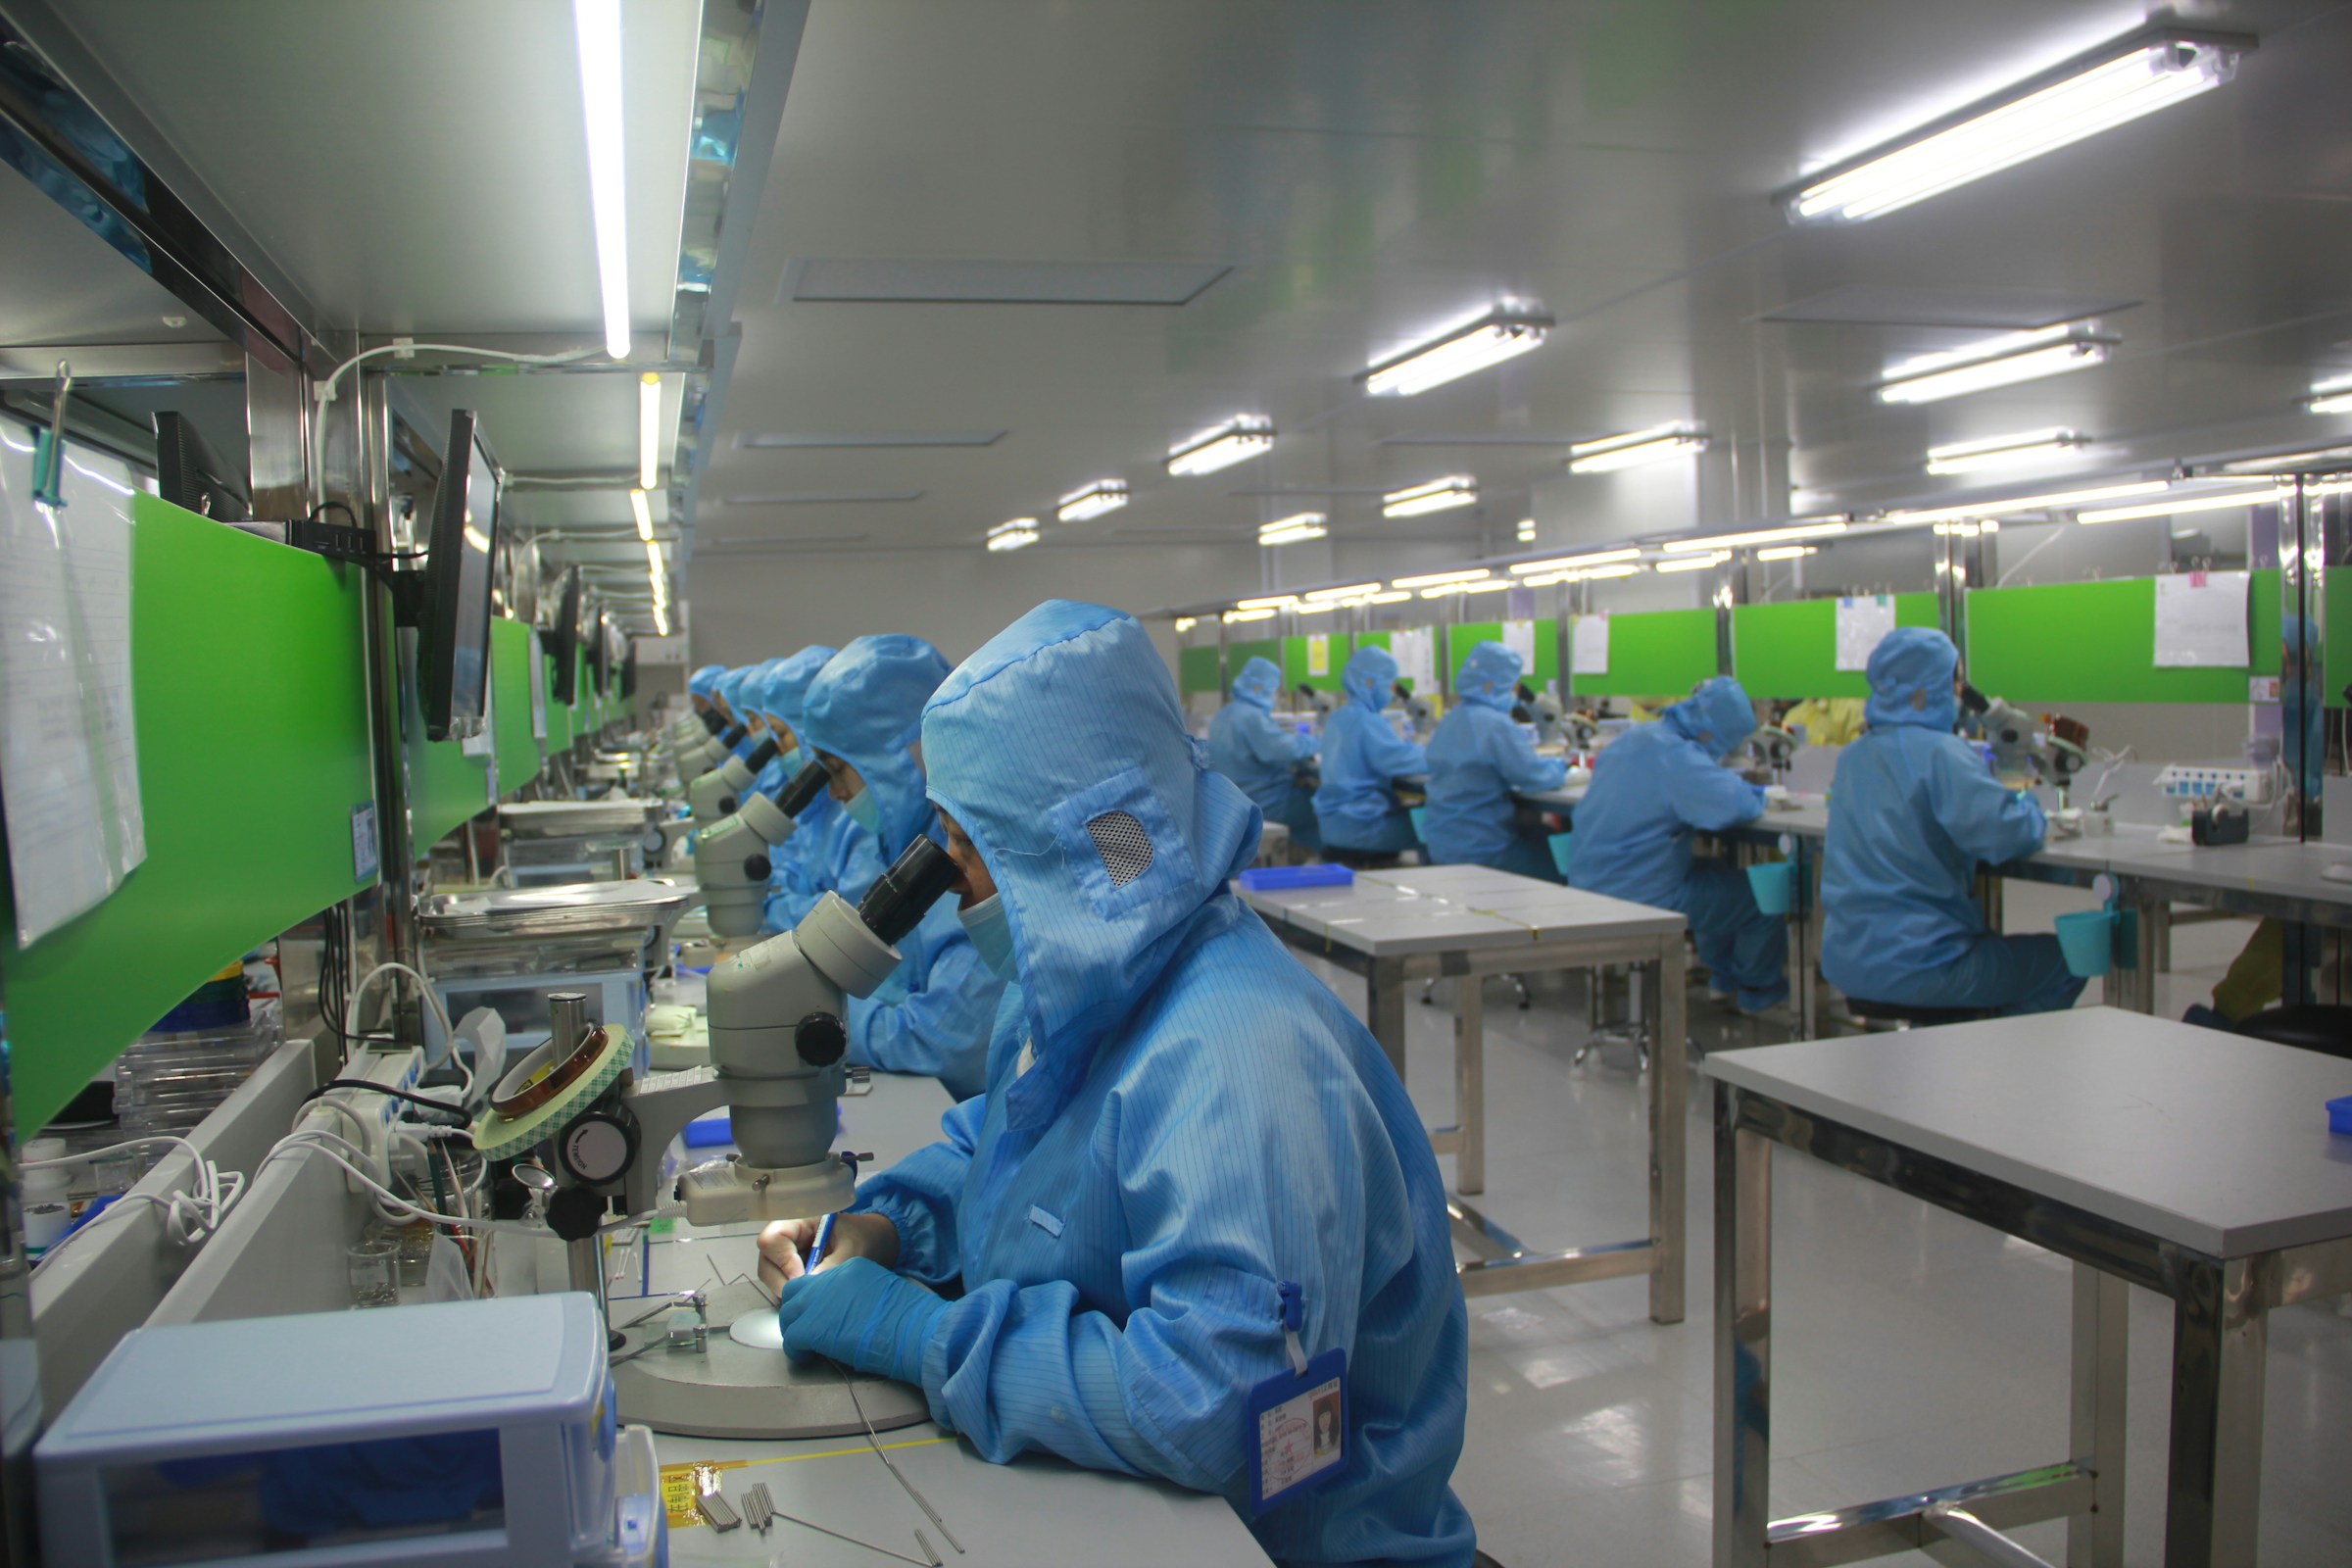 A pharmaceutical laboratory with multiple technicians in blue protective gear.